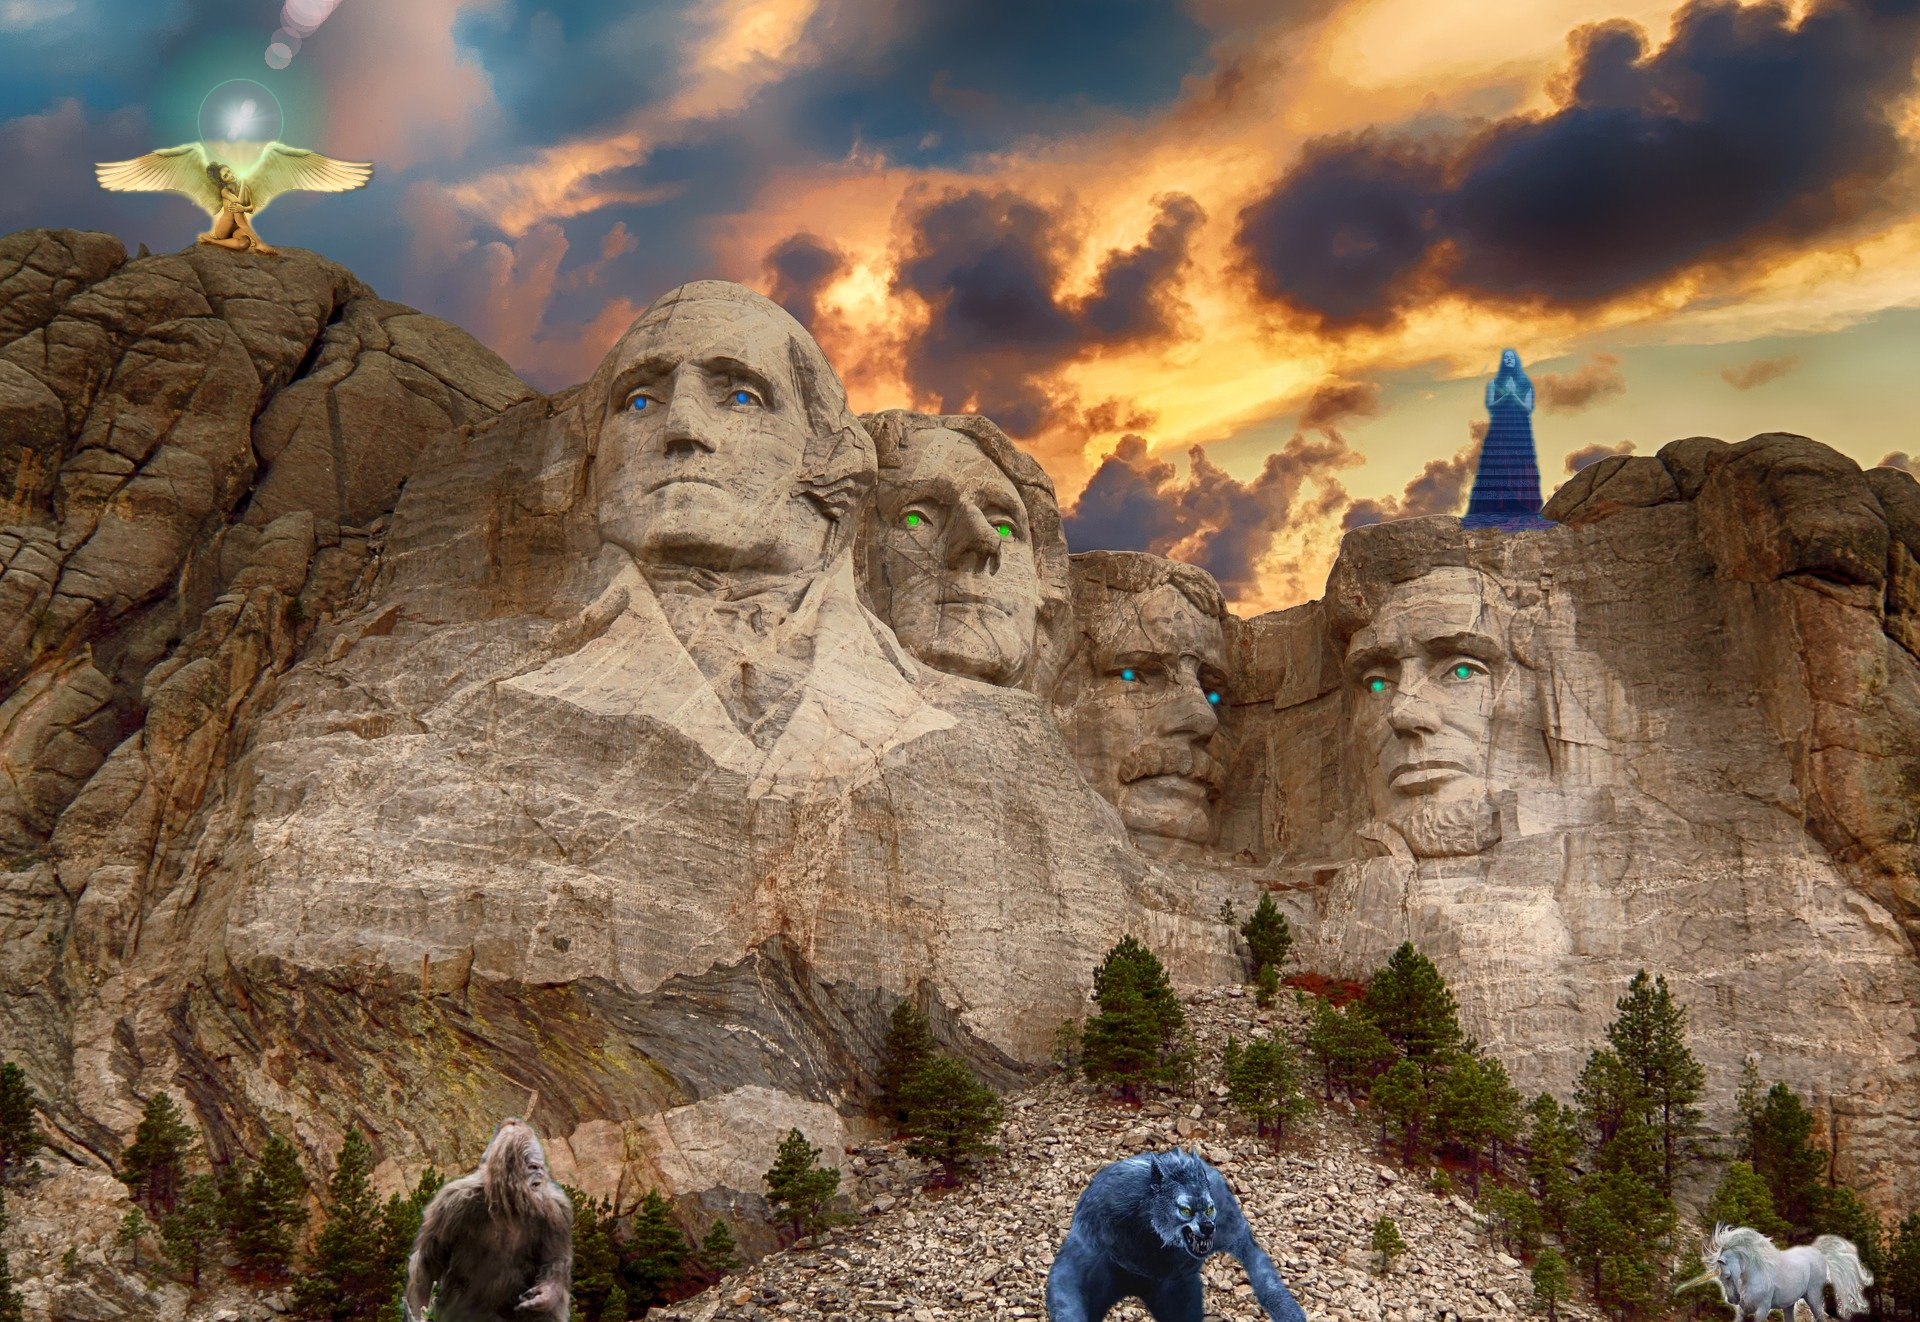 The Supernatural Presidents Of The United States On Mount Rushmore!